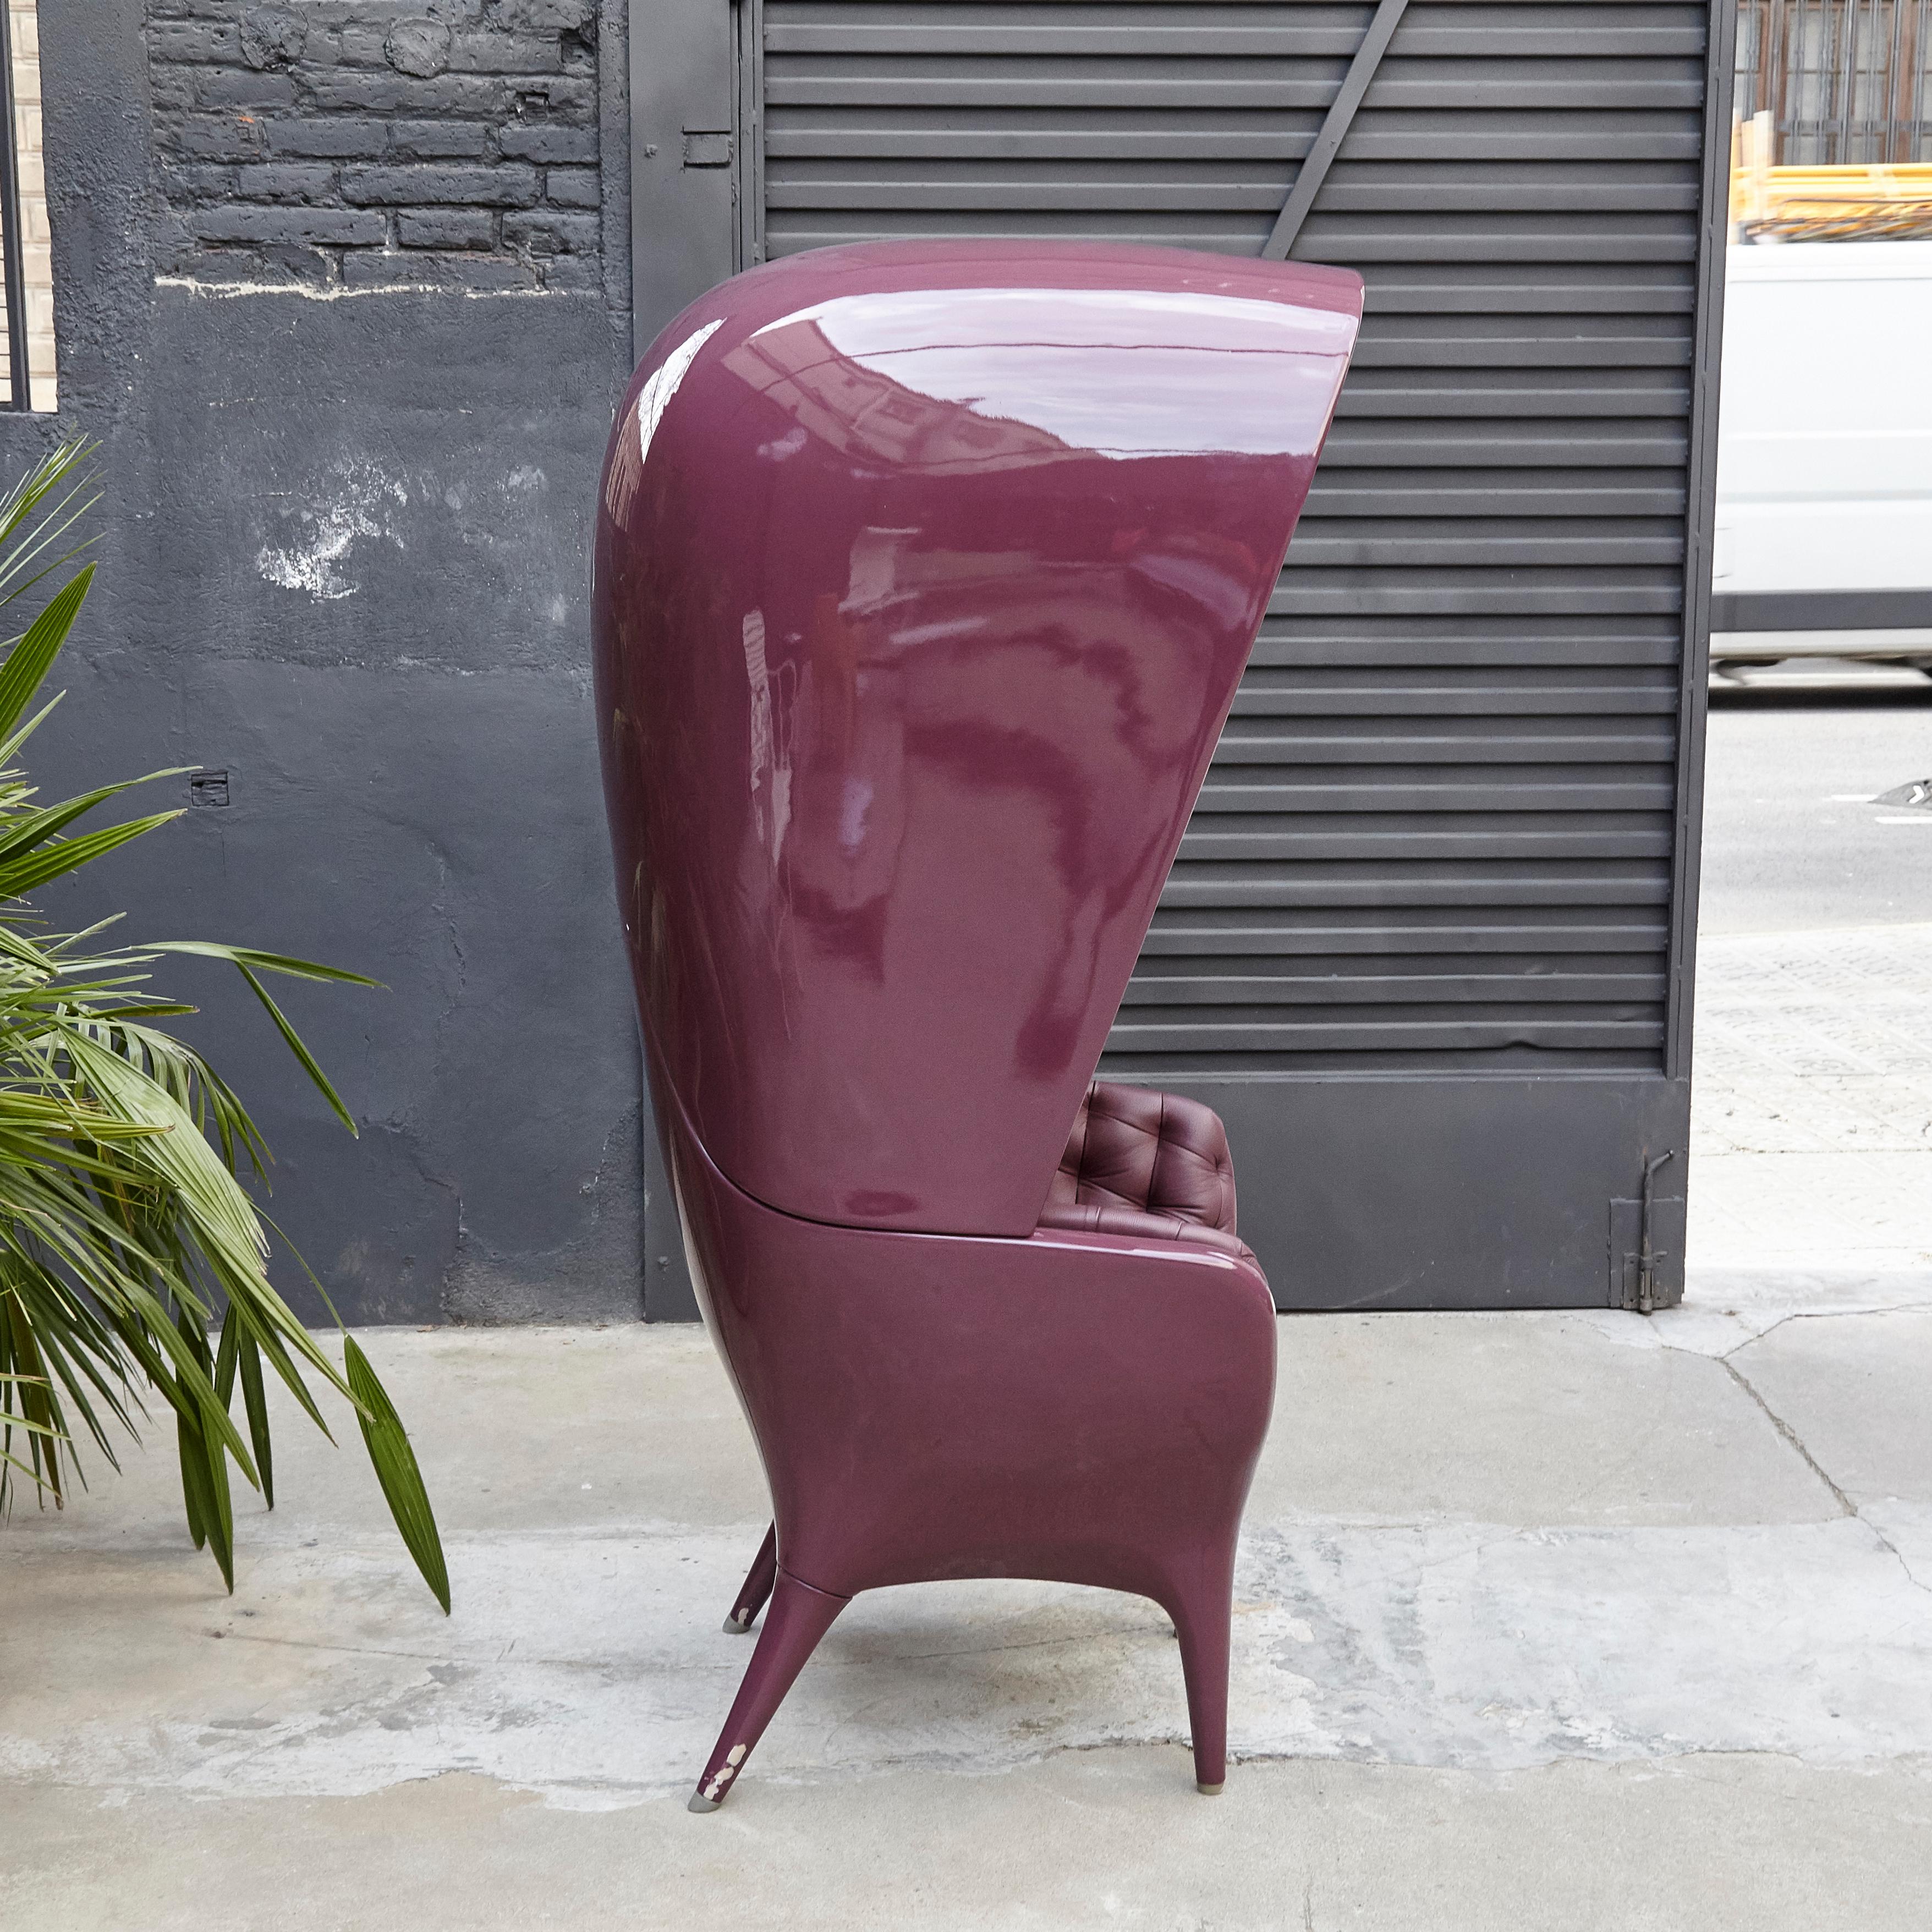 Leather Jaime Hayon Contemporary Showtime Armchair Lacquered Purple Poltrona